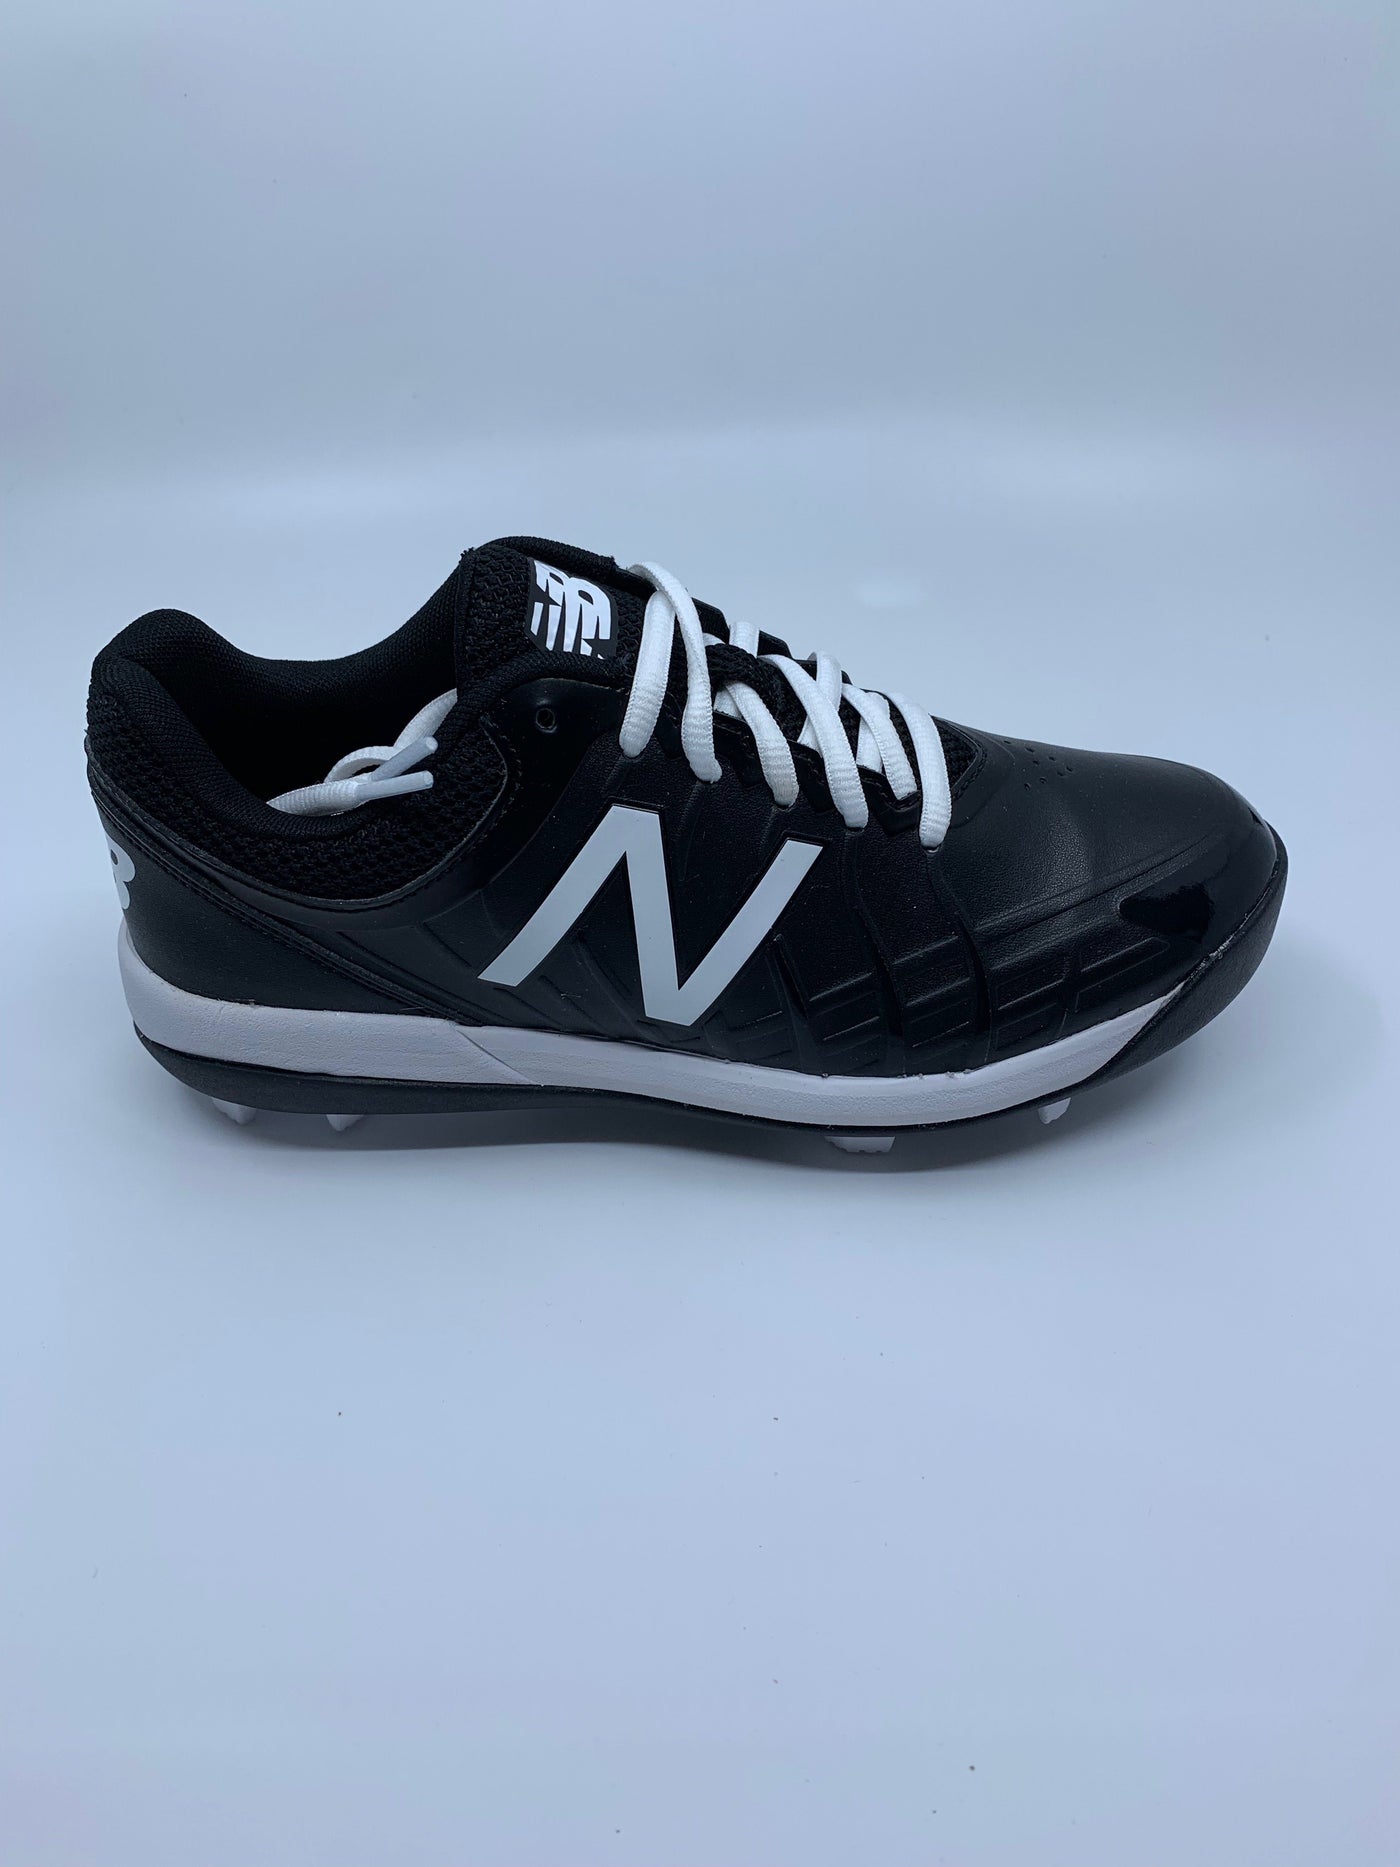 New Balance Youth Molded Junior Cleats 